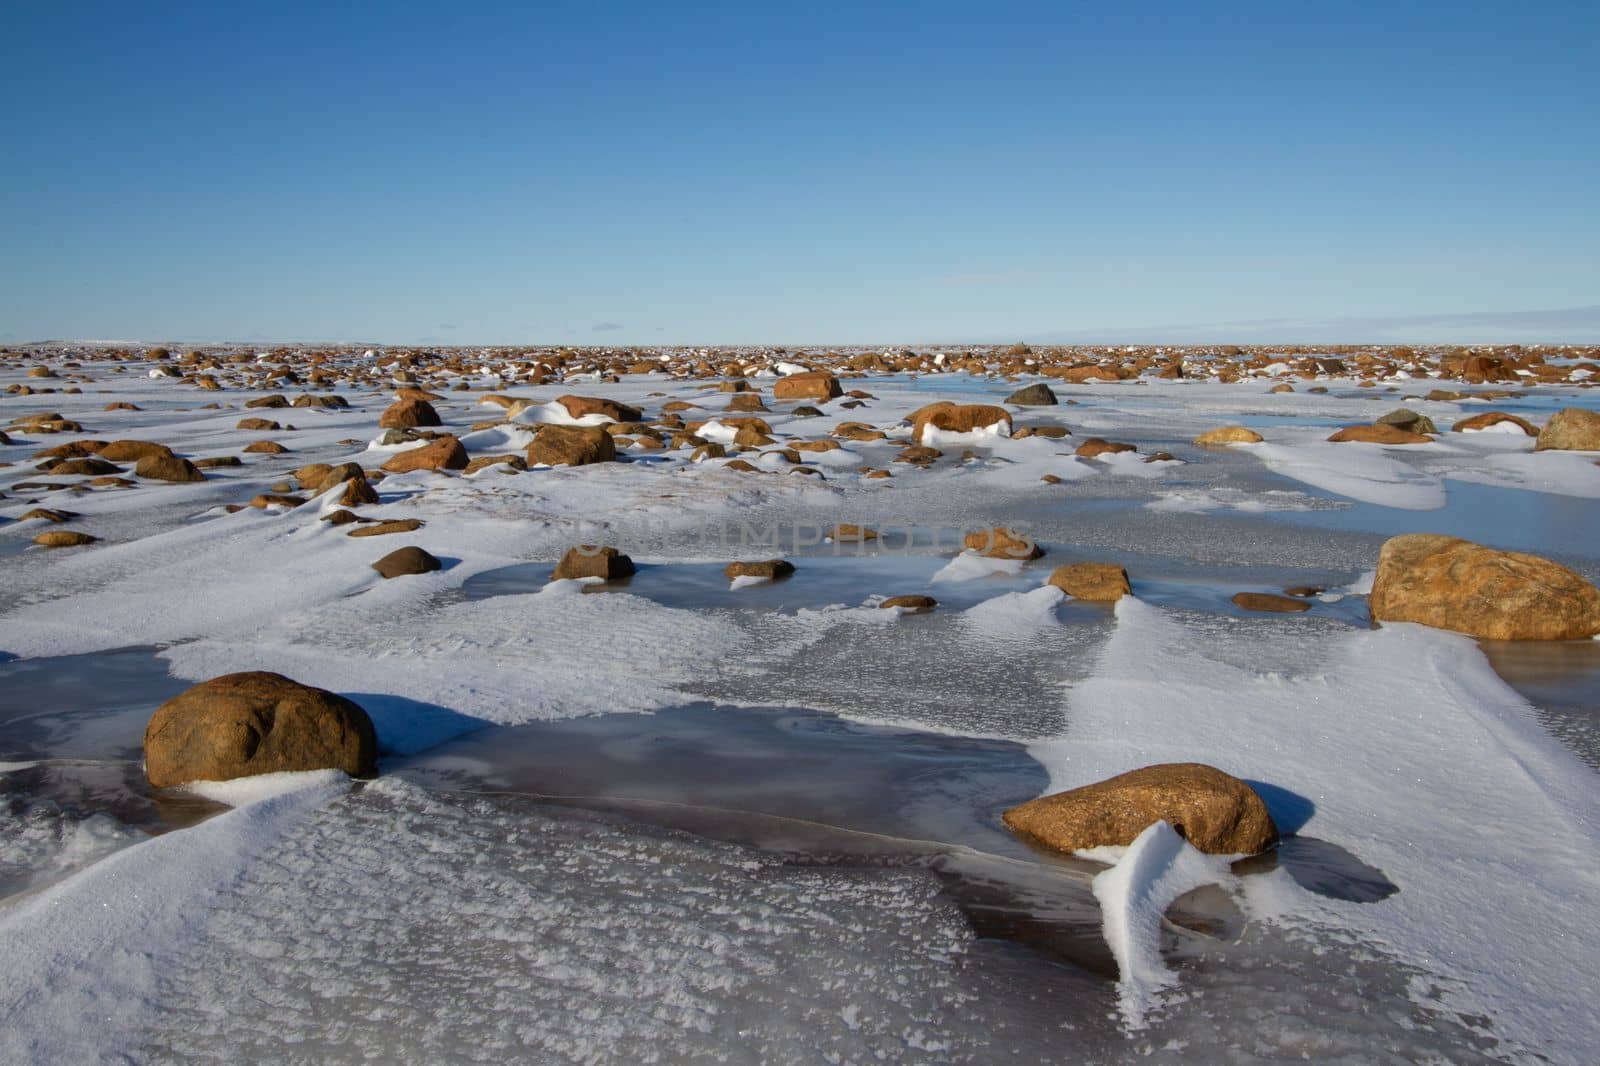 Arctic landscape - frozen arctic tundra in Nunavut over a rocky snow covered waterbody on a clear cold day by Granchinho